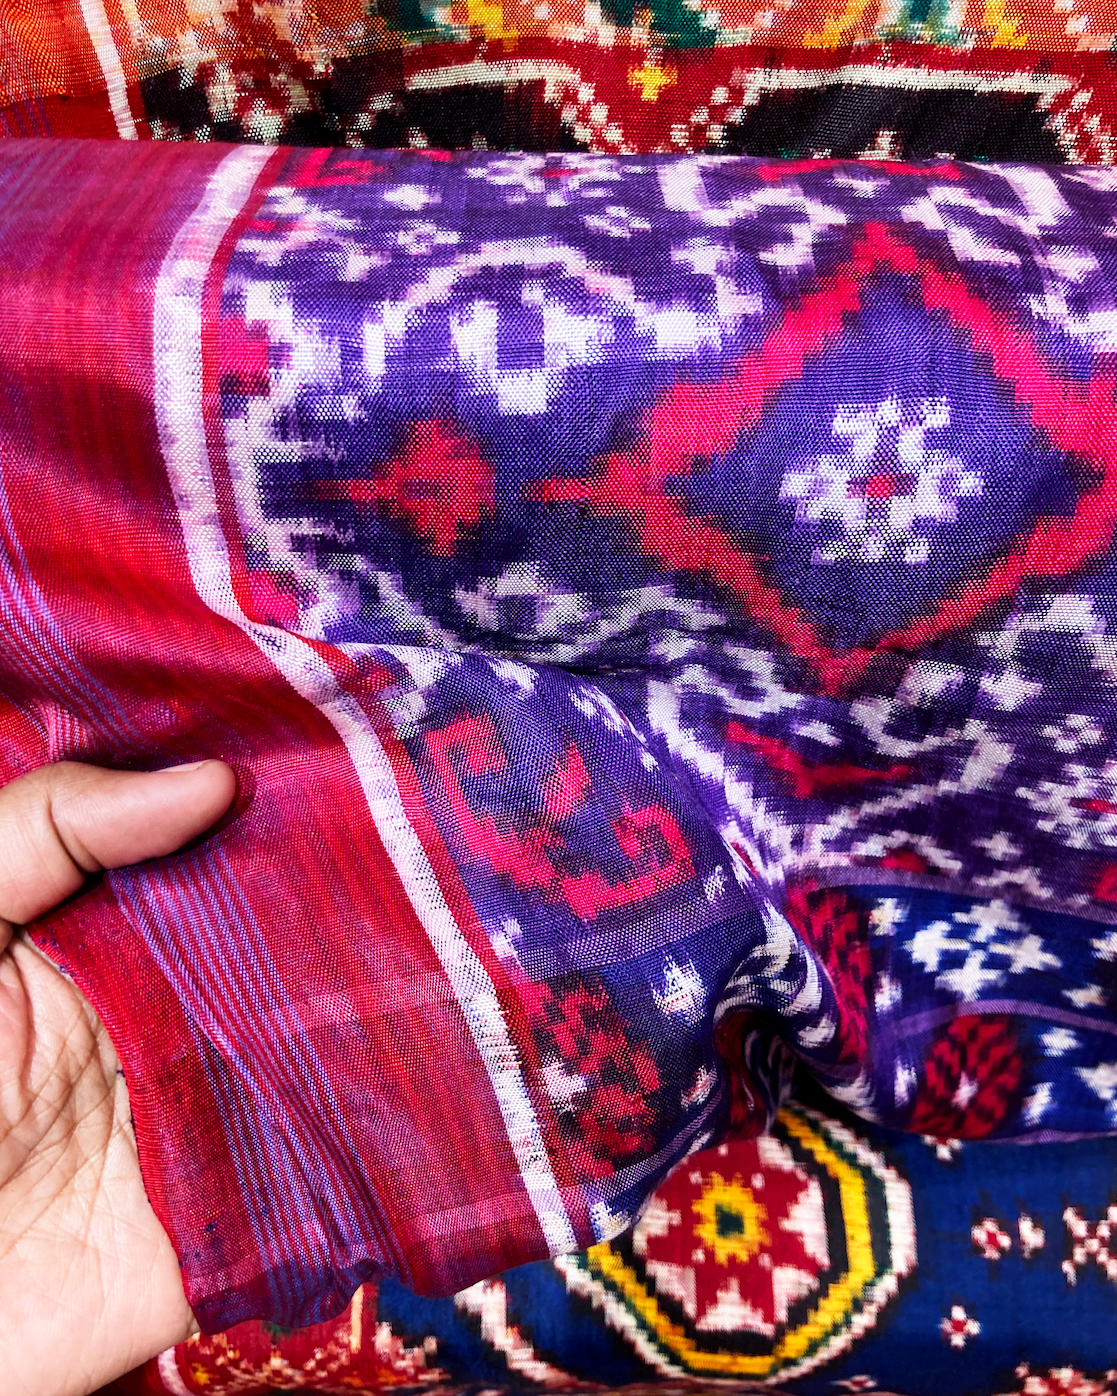 Contemporary Silk Ikat Weaving in Gujarat, India: Perspectives on an Emerging Terrain